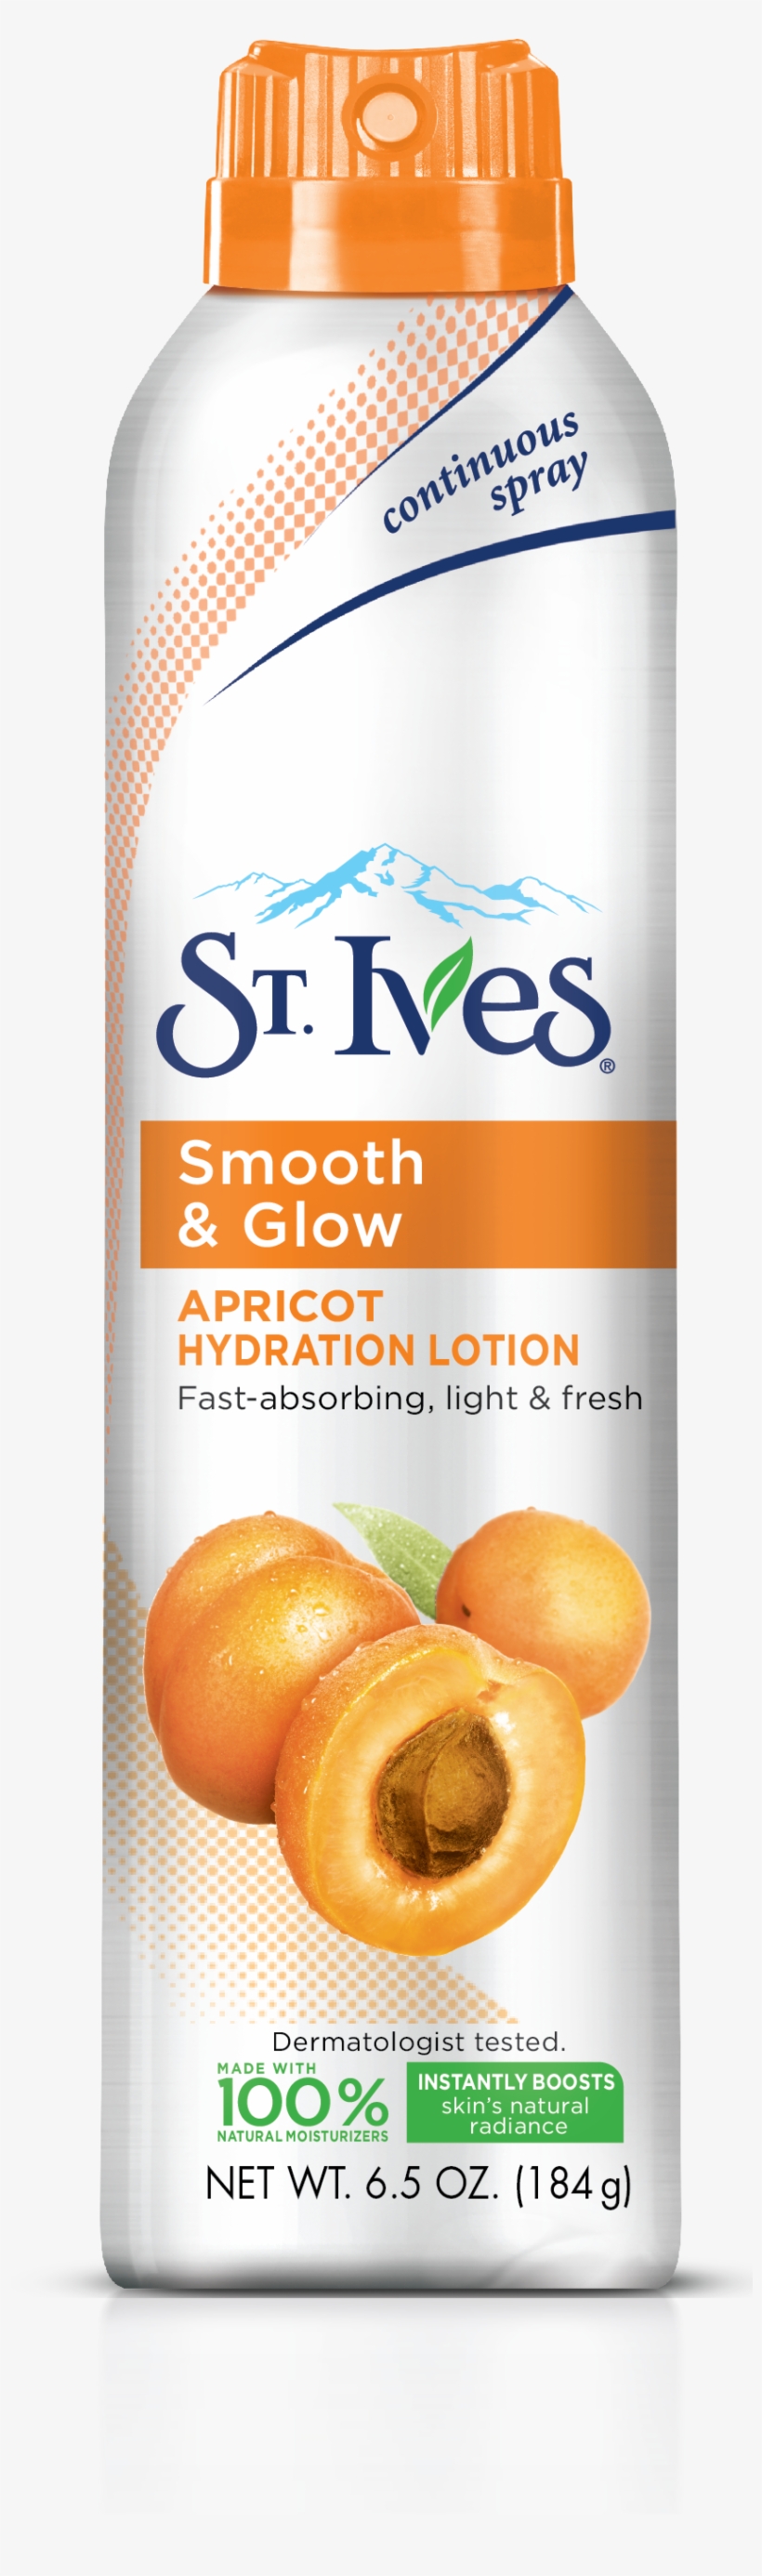 St Ives [sf] Sprays Line Up - St Ives Hydration Lotion Spray, transparent png #5778393